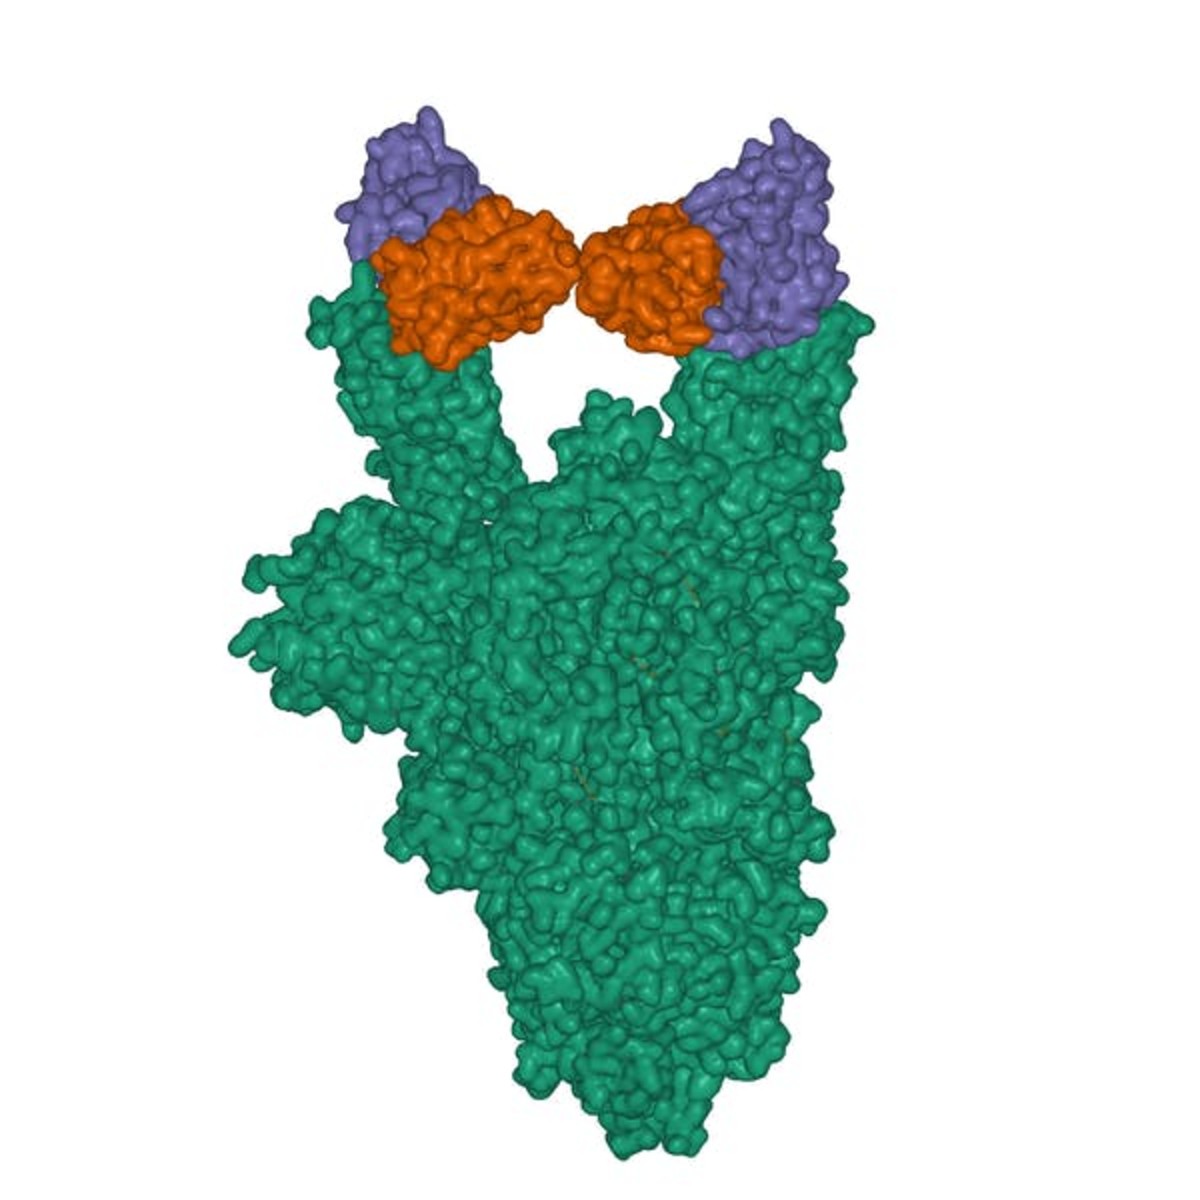 When a Y-shaped antibody (green) binds to the spike protein (blue and brown) of the SARS-CoV-2, the coronavirus is unable to infect cells. vdvornyk/iStock/Getty Images Plus